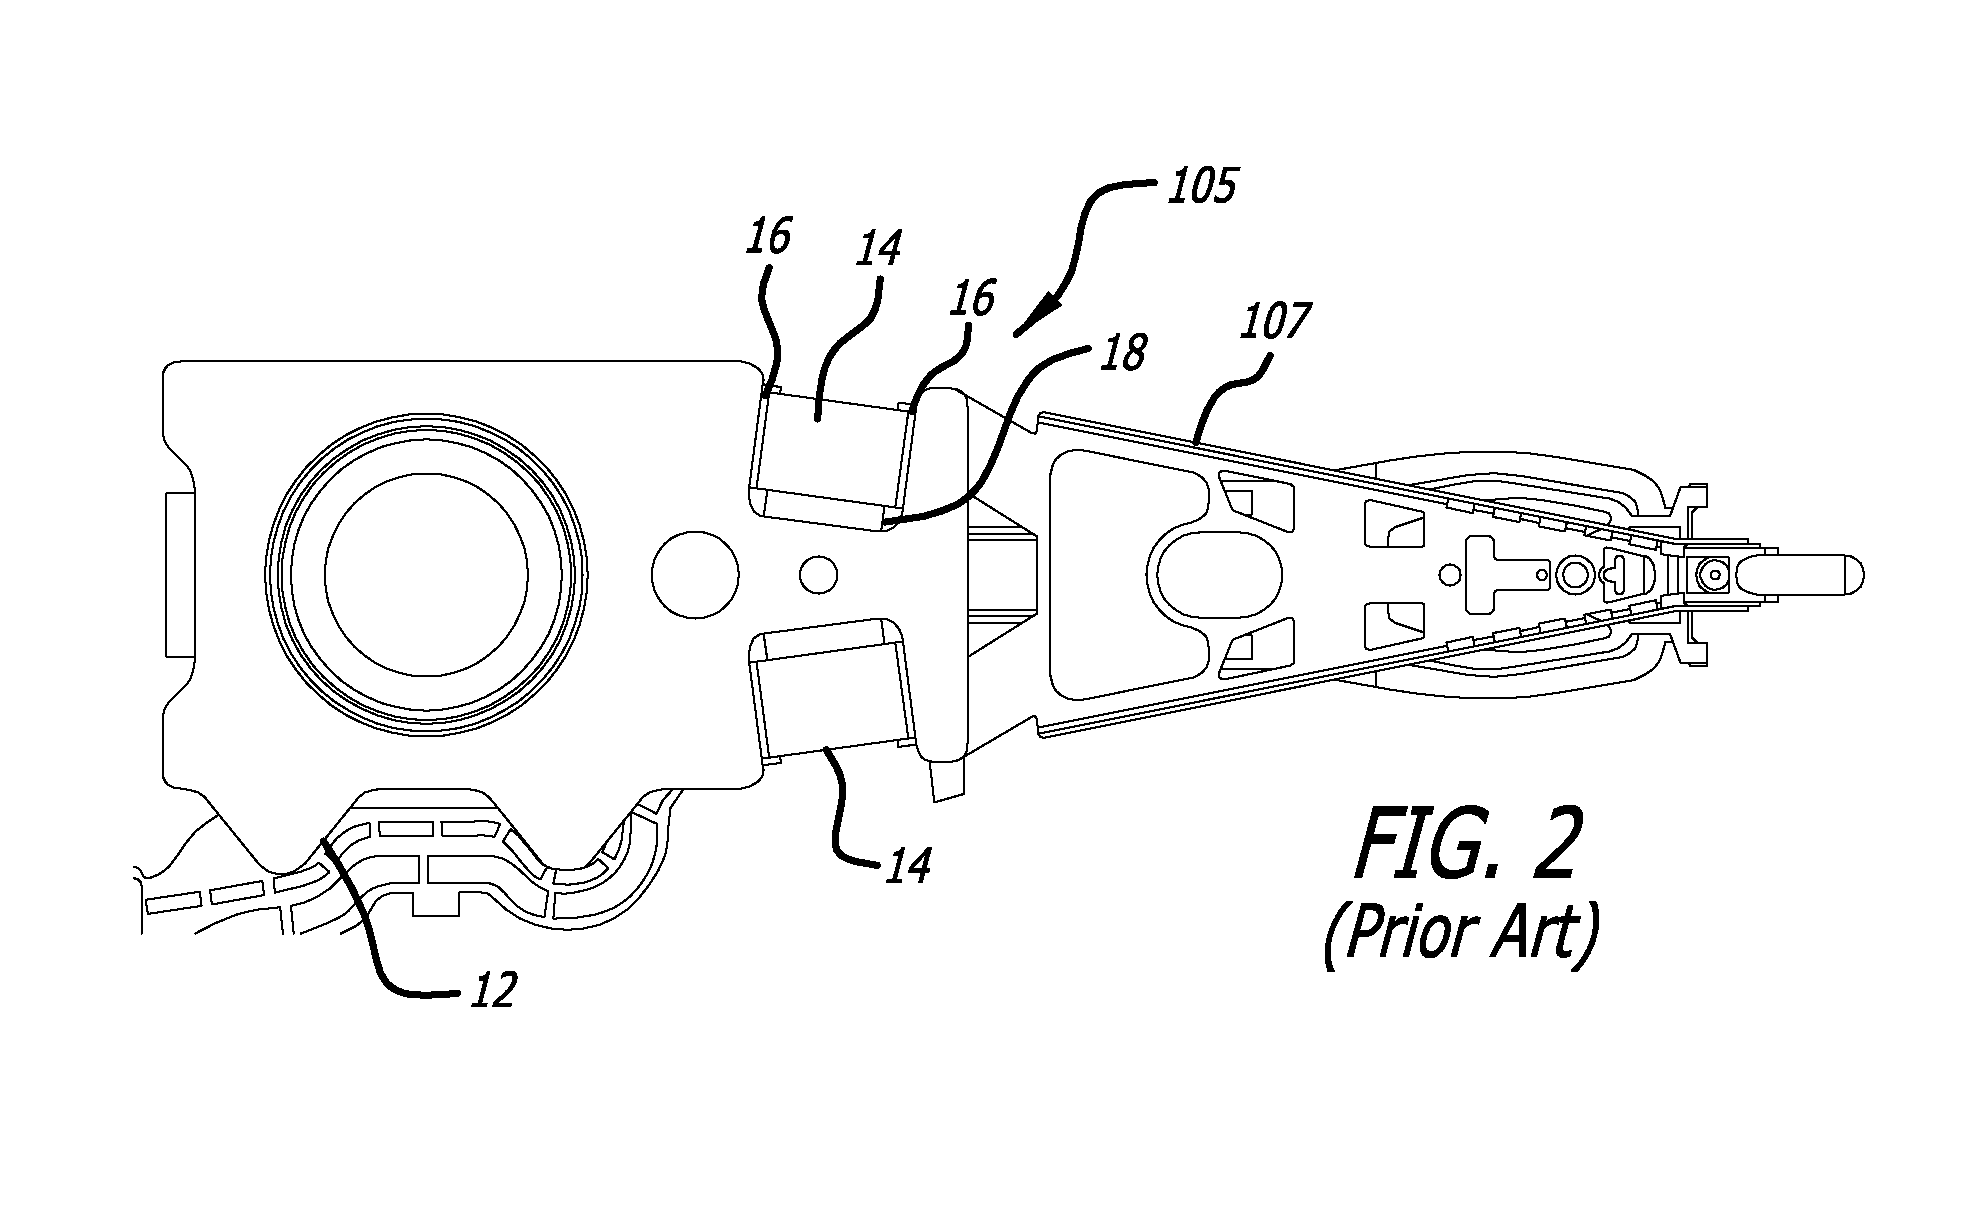 Piezoelectric microactuator with restraining layer for control of bending